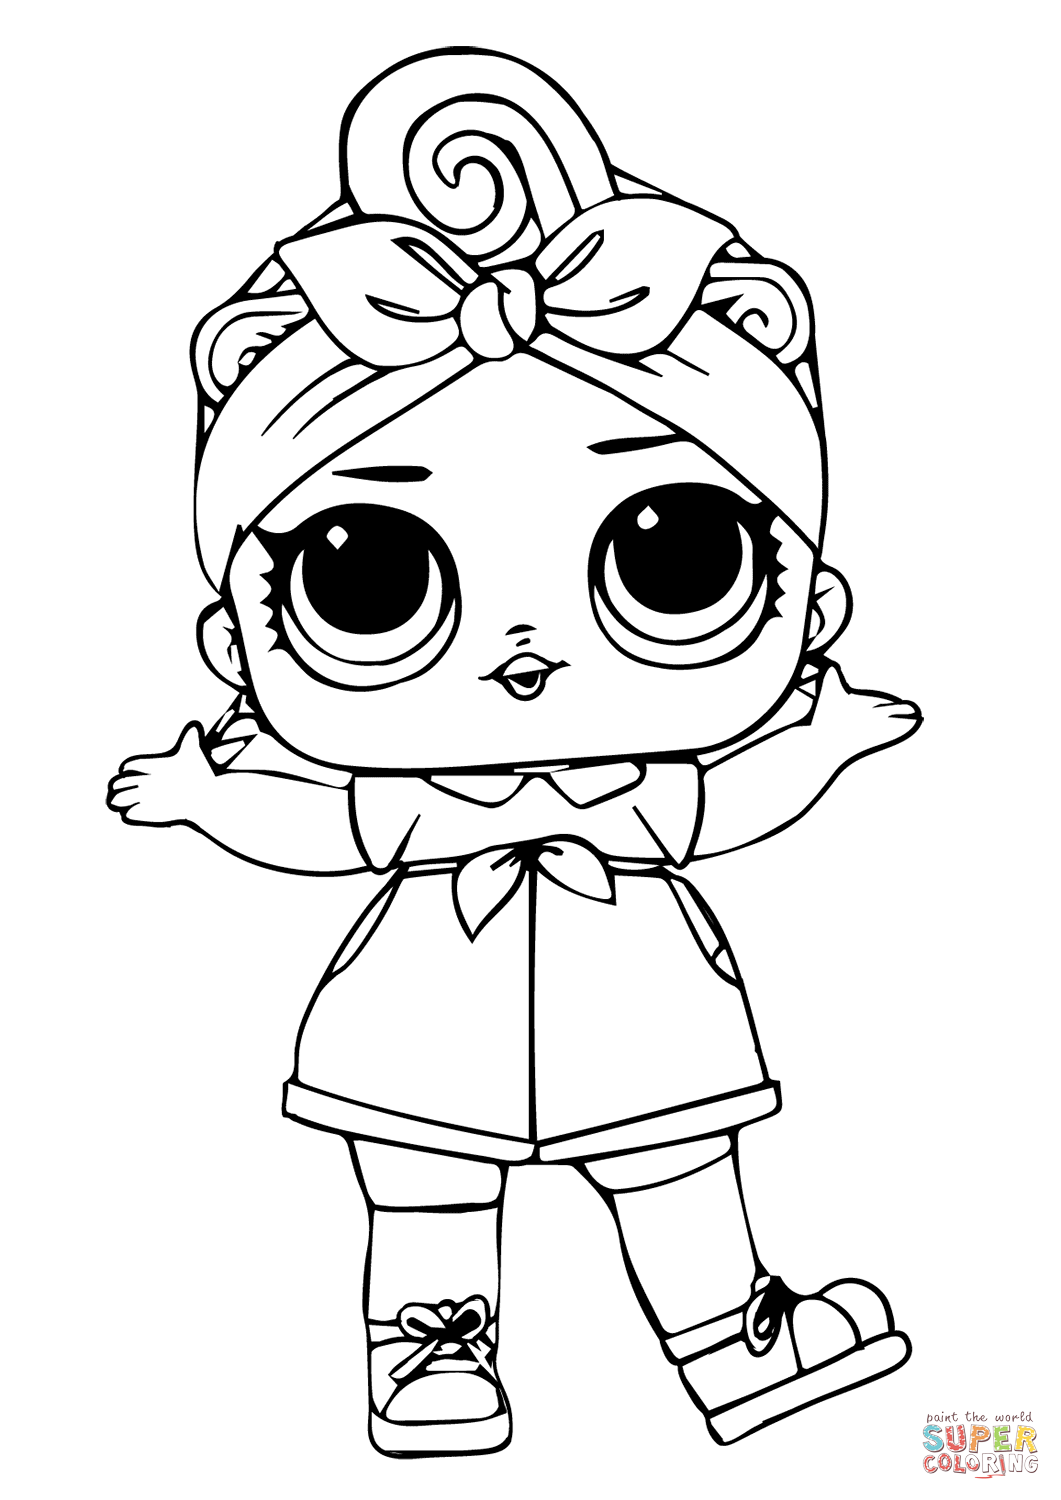 Baby Dolls Coloring Pages - Coloring Home